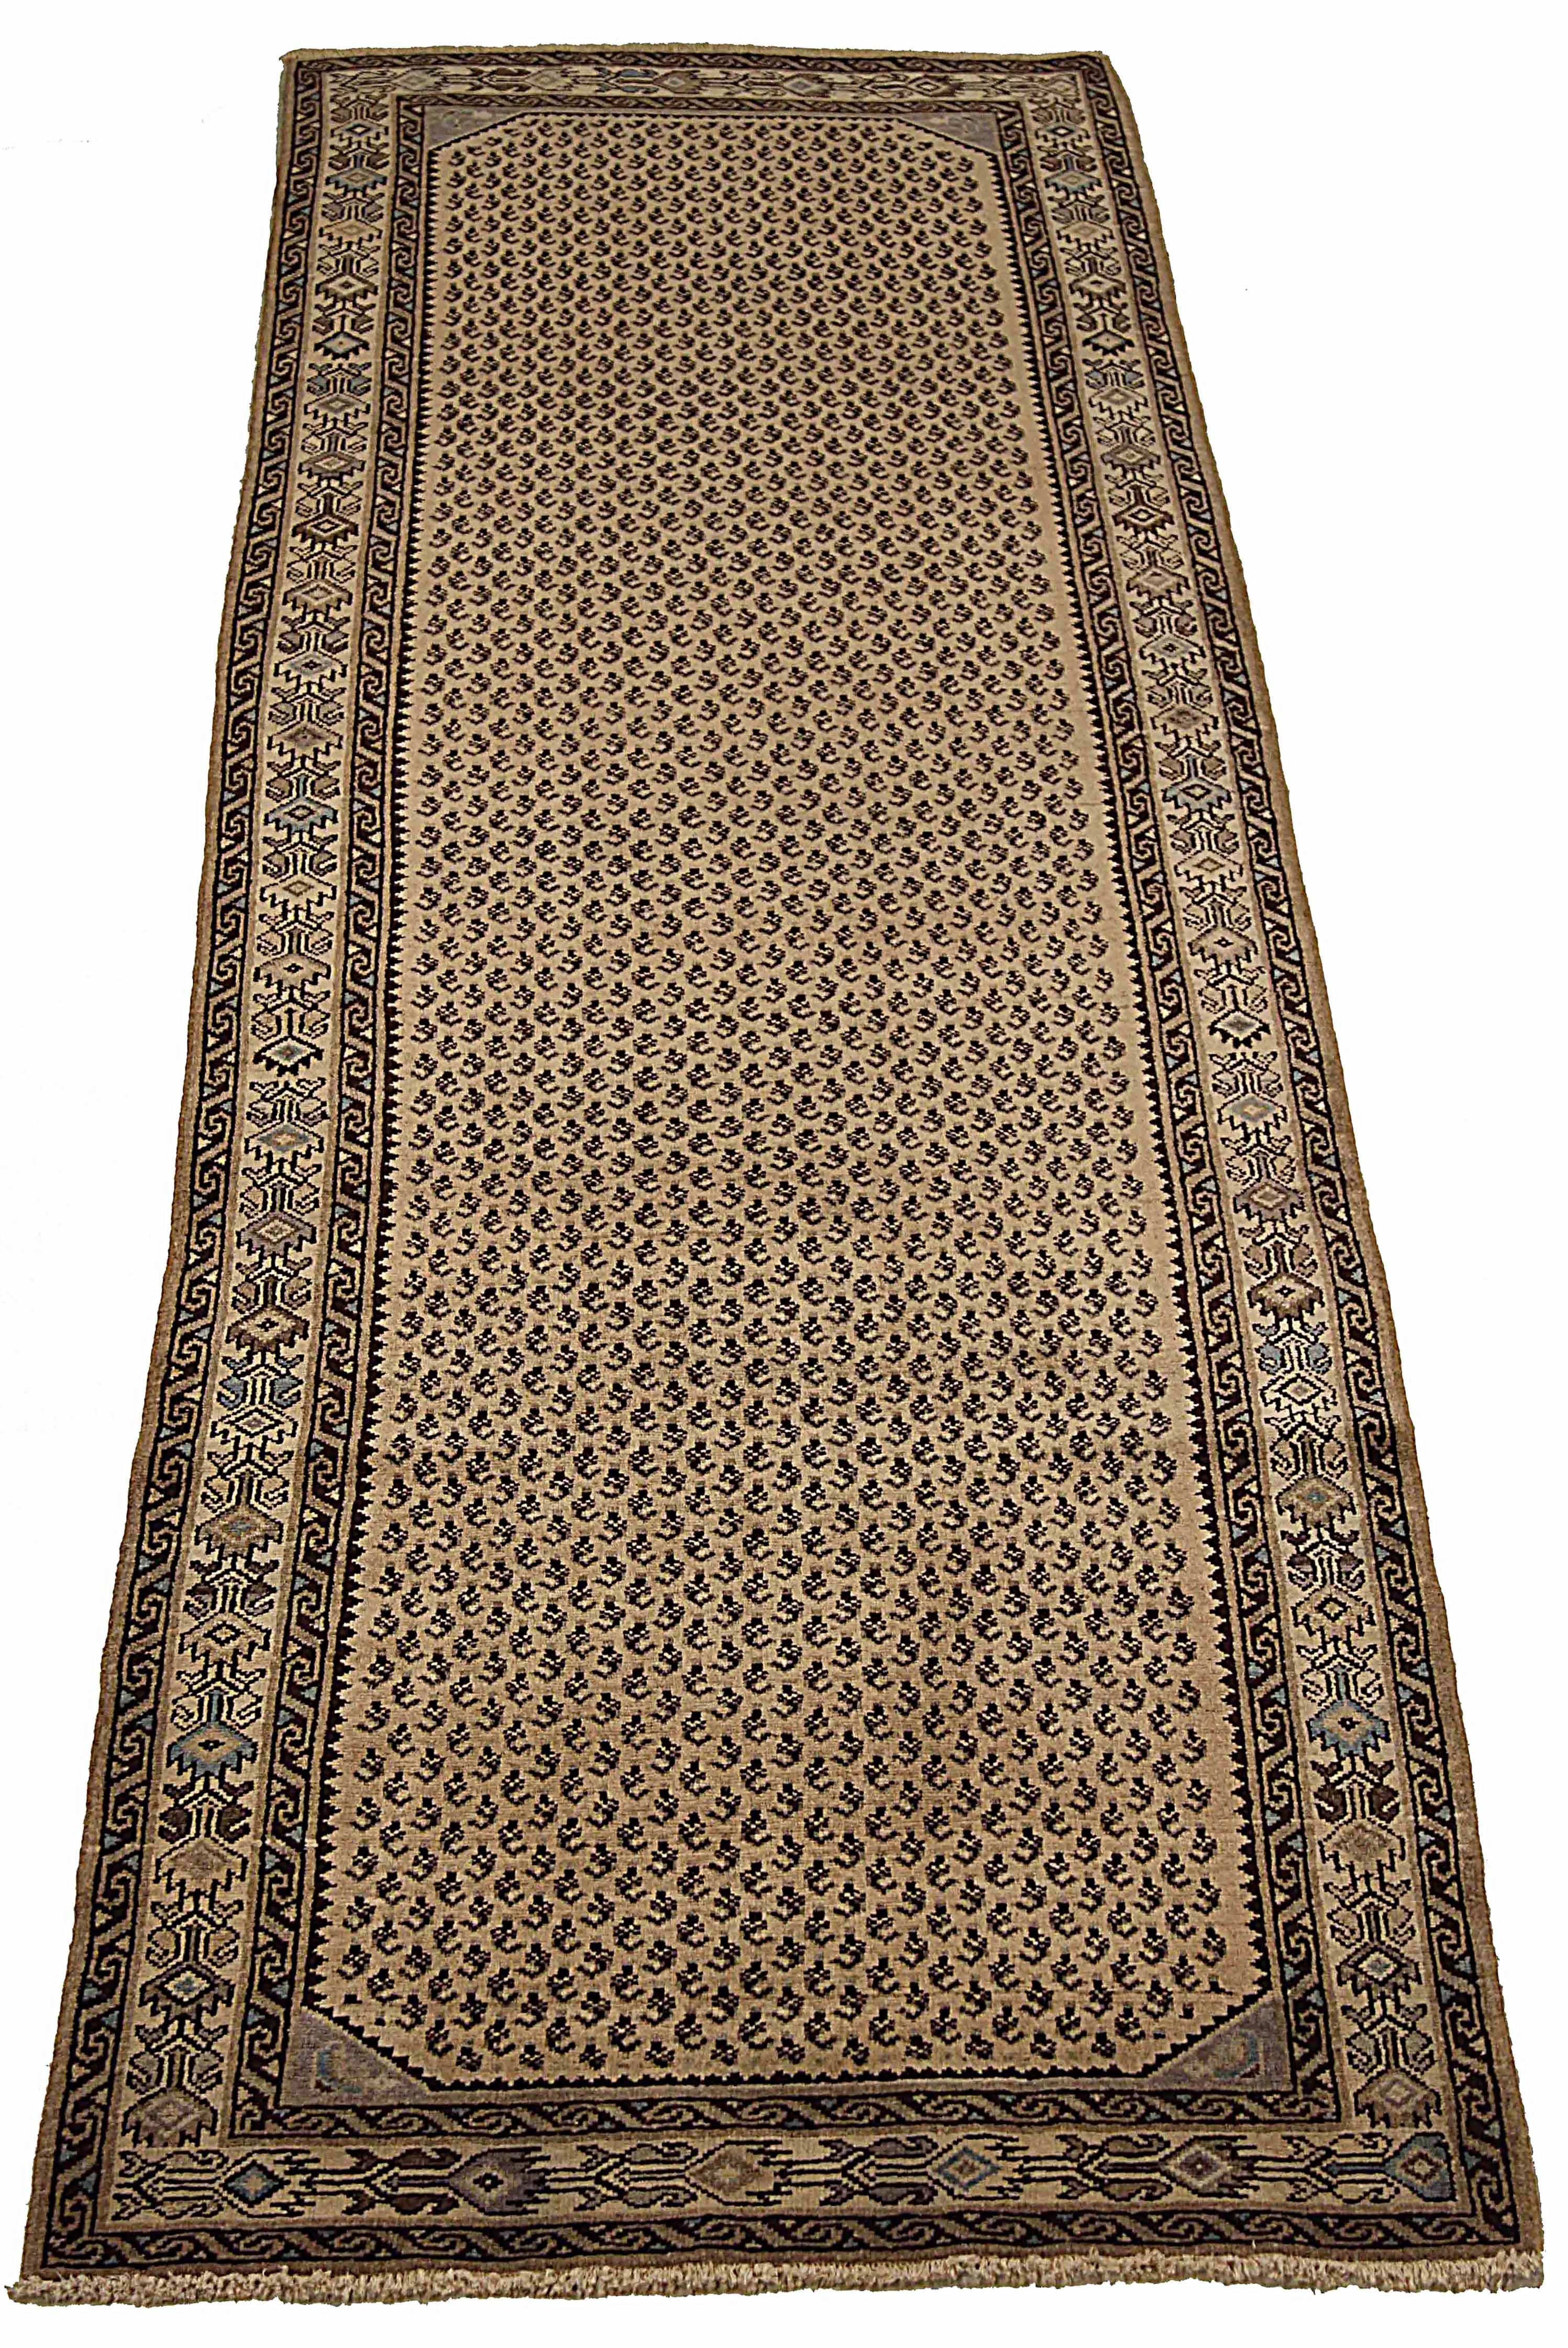 Antique Persian area rug handwoven from the finest sheep’s wool. It’s colored with all-natural vegetable dyes that are safe for humans and pets. It’s a traditional Hamedan design handwoven by expert artisans. It’s a lovely area rug that can be